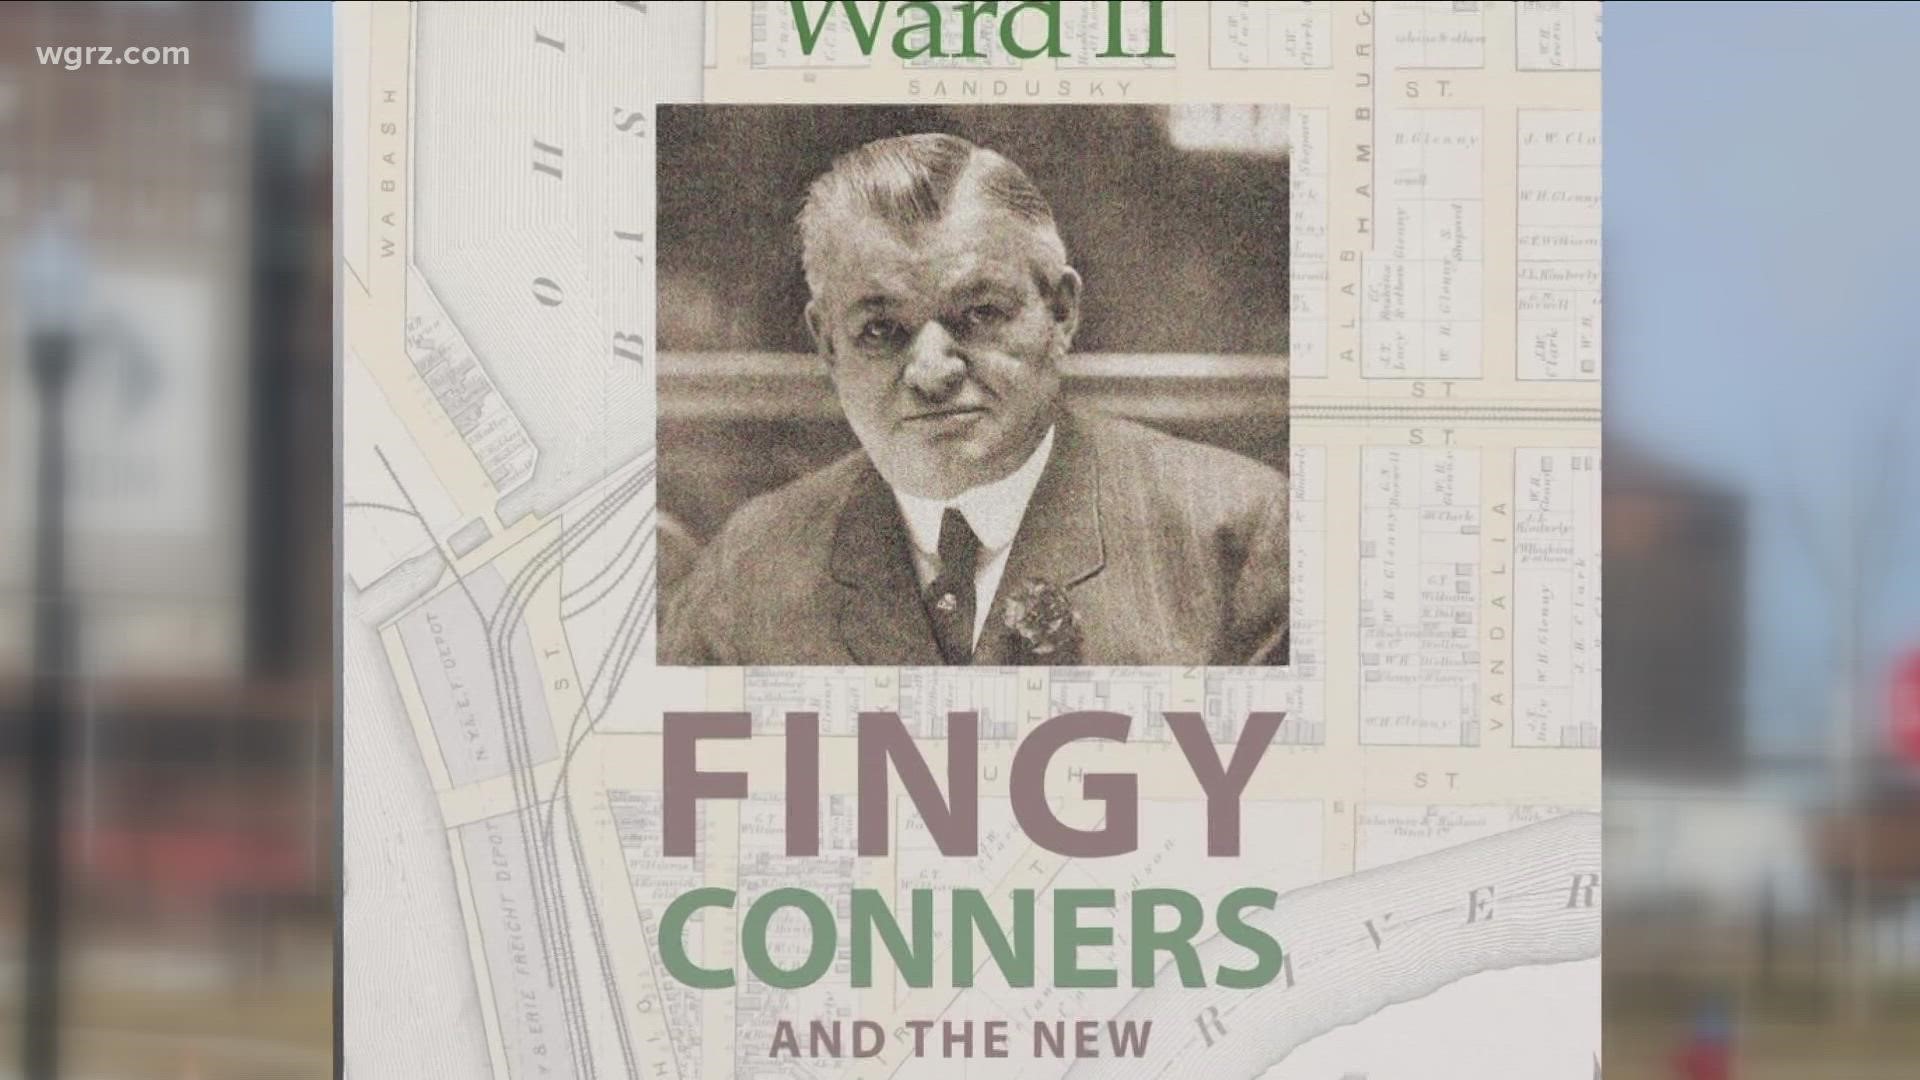 William 'Fingy' Conners grew up in one of Buffalo's oldest Irish neighborhoods and rose to become one of the wealthiest men in the city's history.